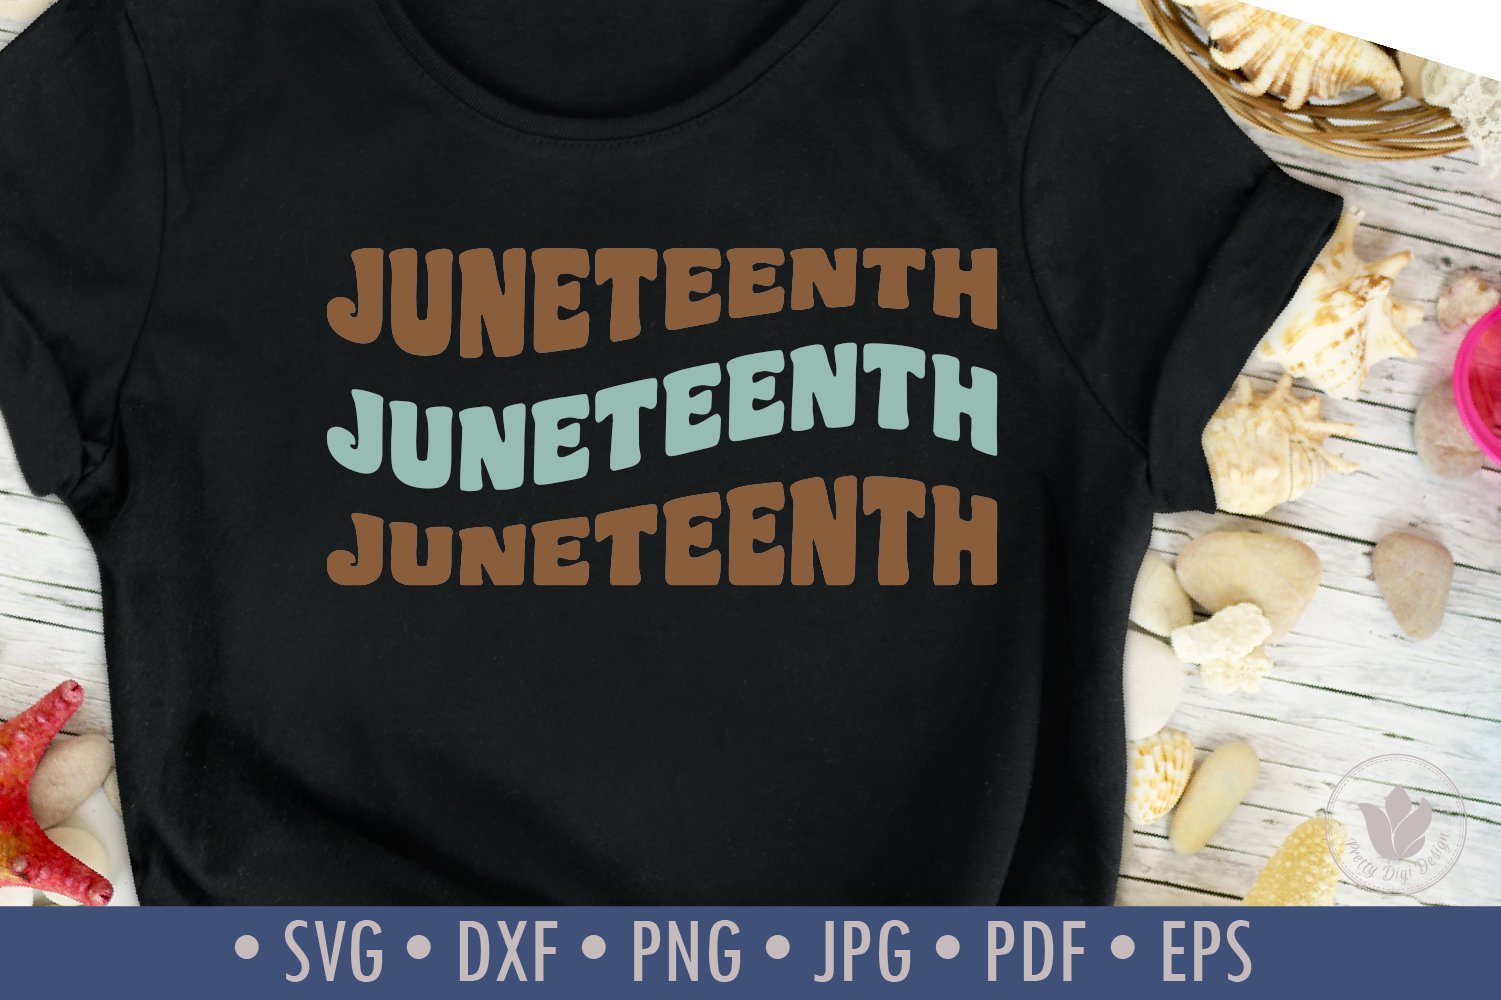 Black T-shirt with multi-colored print with the word "juneteenth".